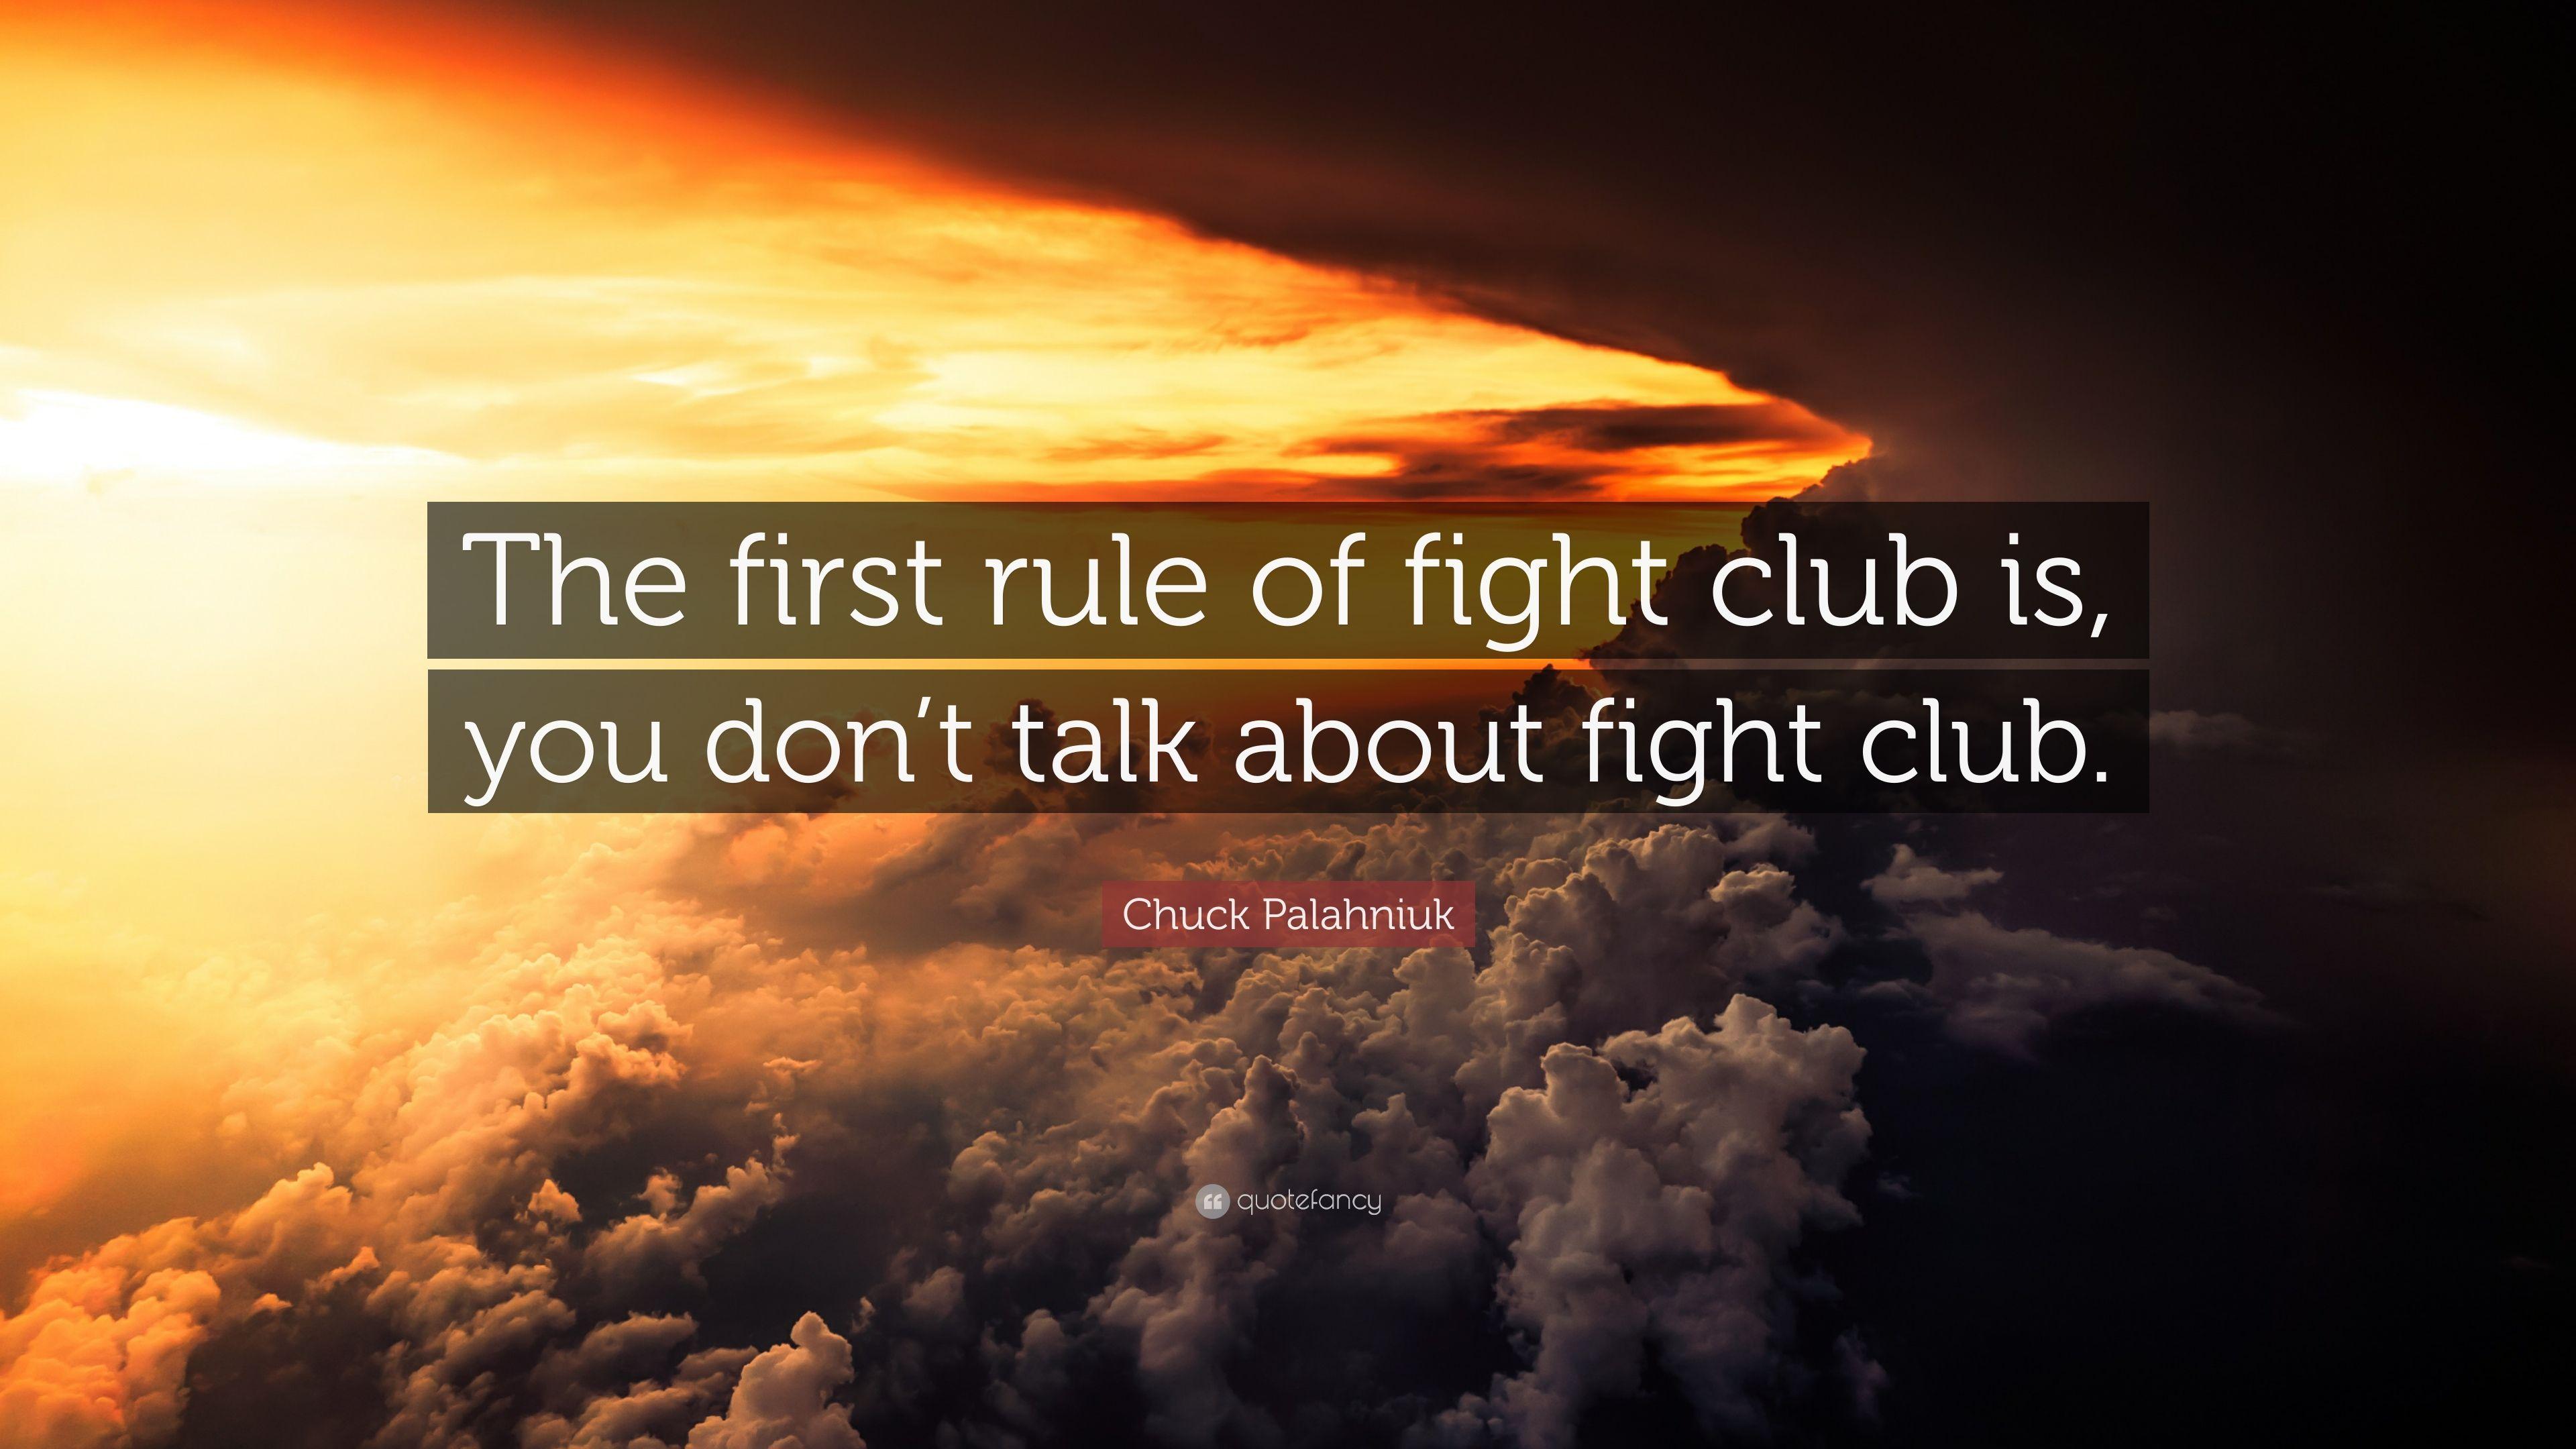 Chuck Palahniuk Quote: “The first rule of fight club is, you don't